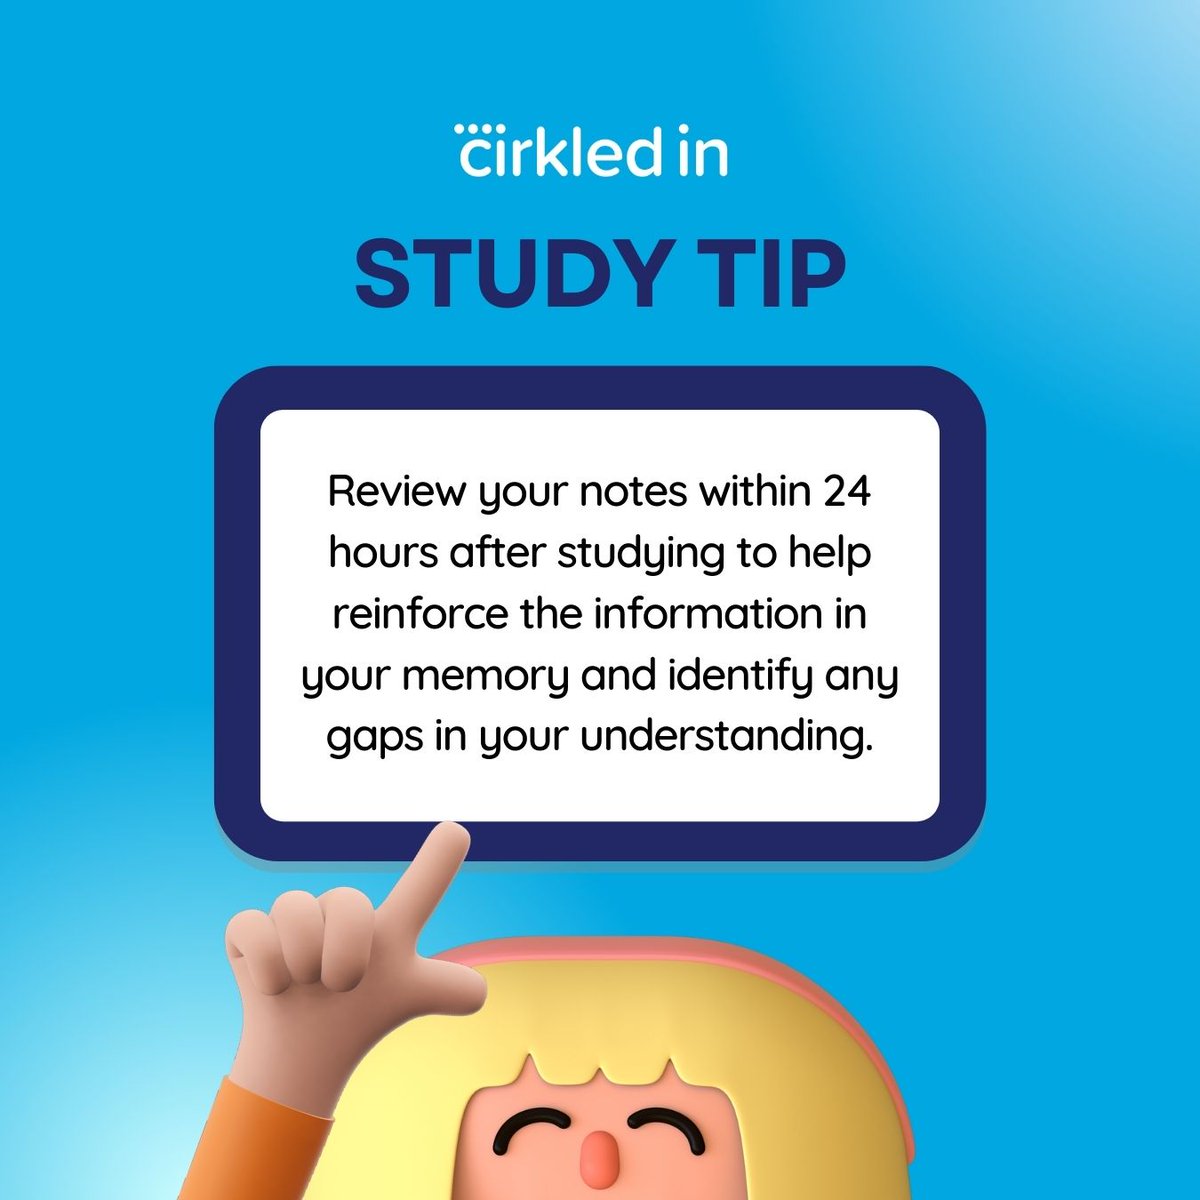 Don't wait until later! Make sure to go through your notes right after class to maximize your learning potential. 📝✨

 #studytip #education #notekeeping #studentsuccess #learning #productivity #studentlife #studygram #notetaking #studysmart